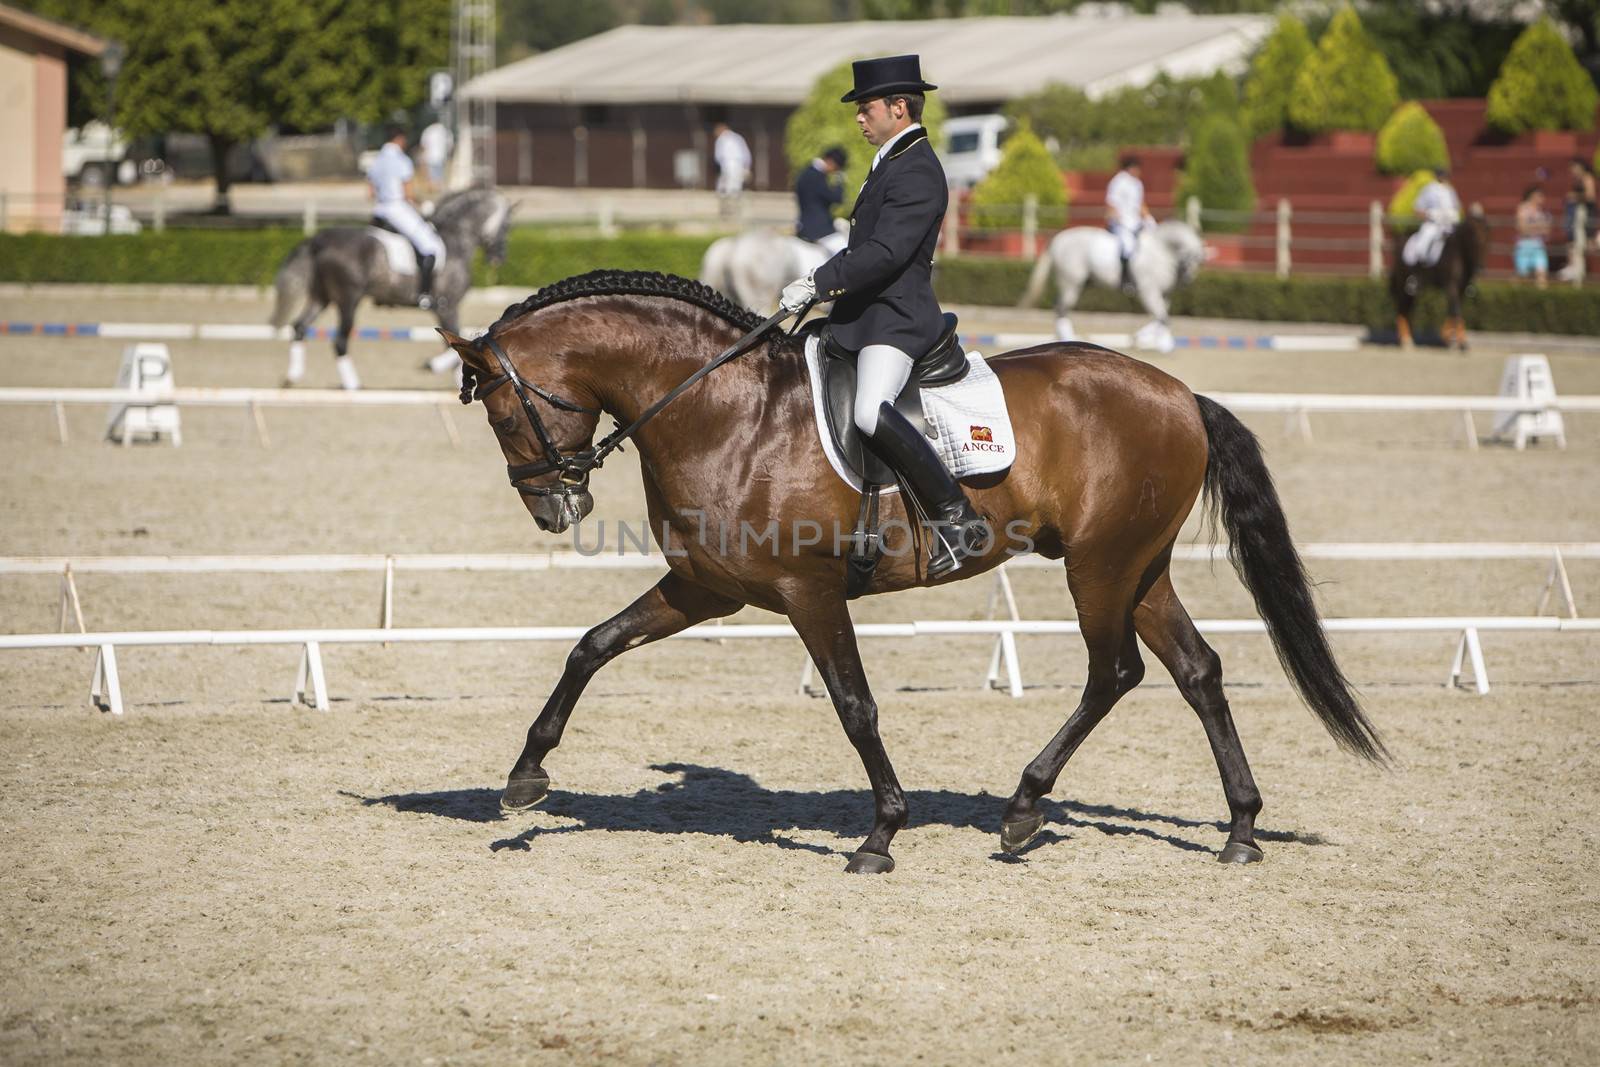 Estepona, Malaga province, SPAIN - 4 september 2009: Spanish horse of pure race taking part during an exercise of equestrian morphology in Estepona, Malaga province, Andalusia, Spain